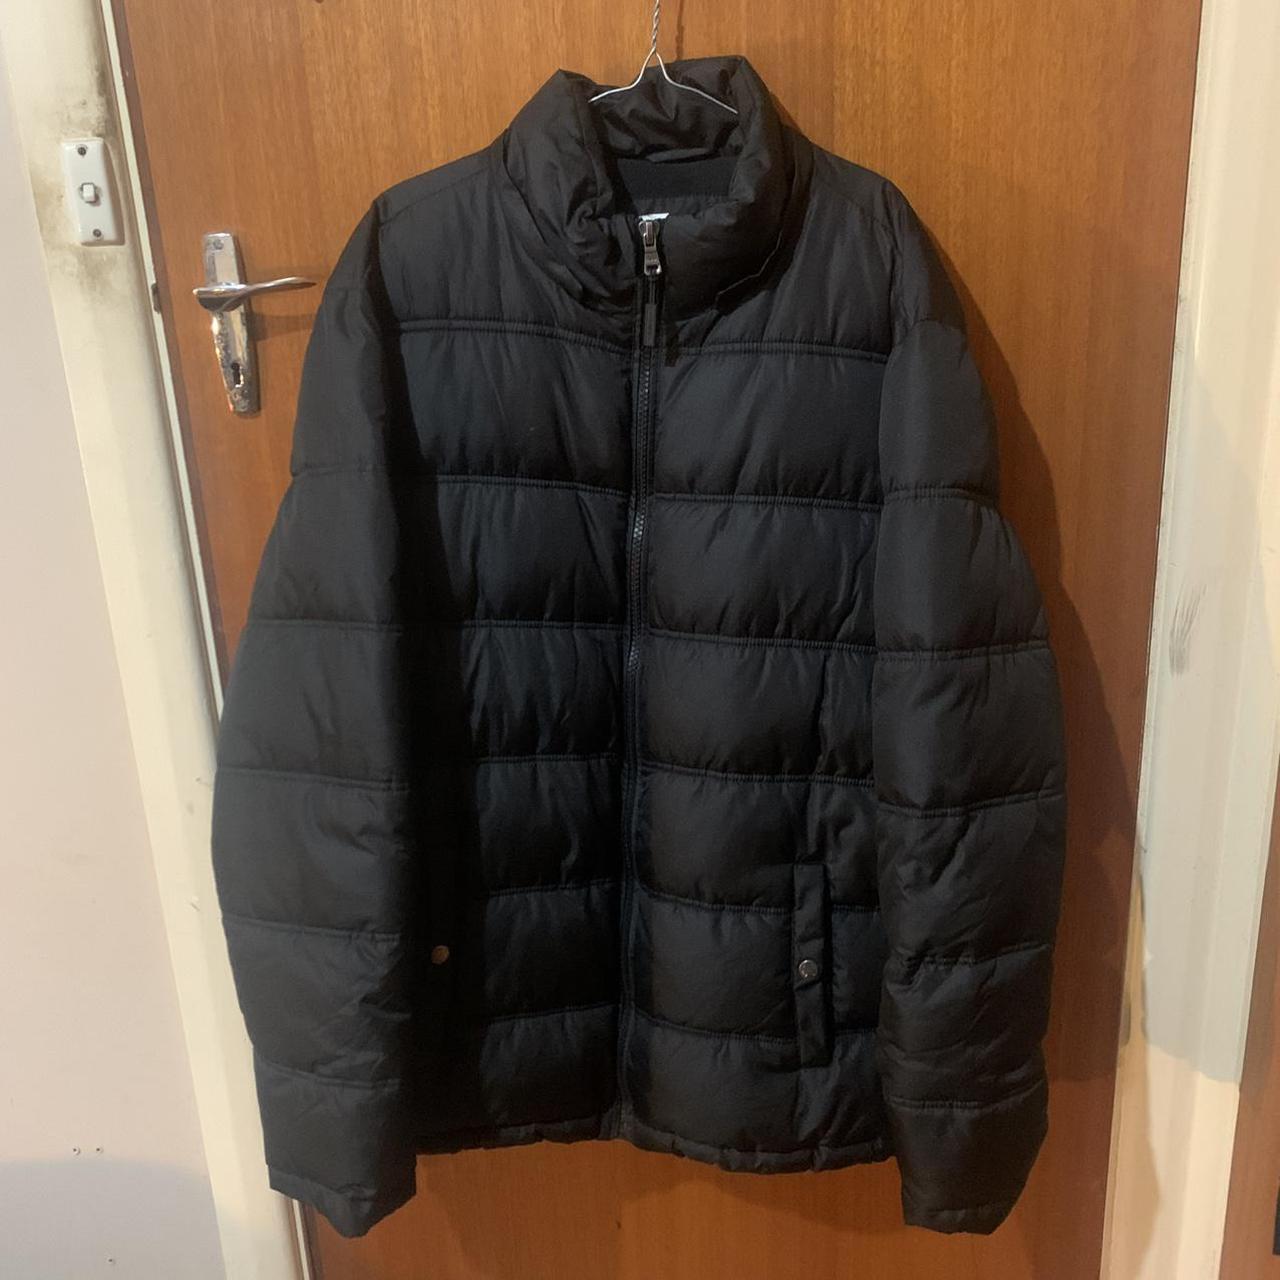 I’m branded black puffer jacket (with remove-able... - Depop